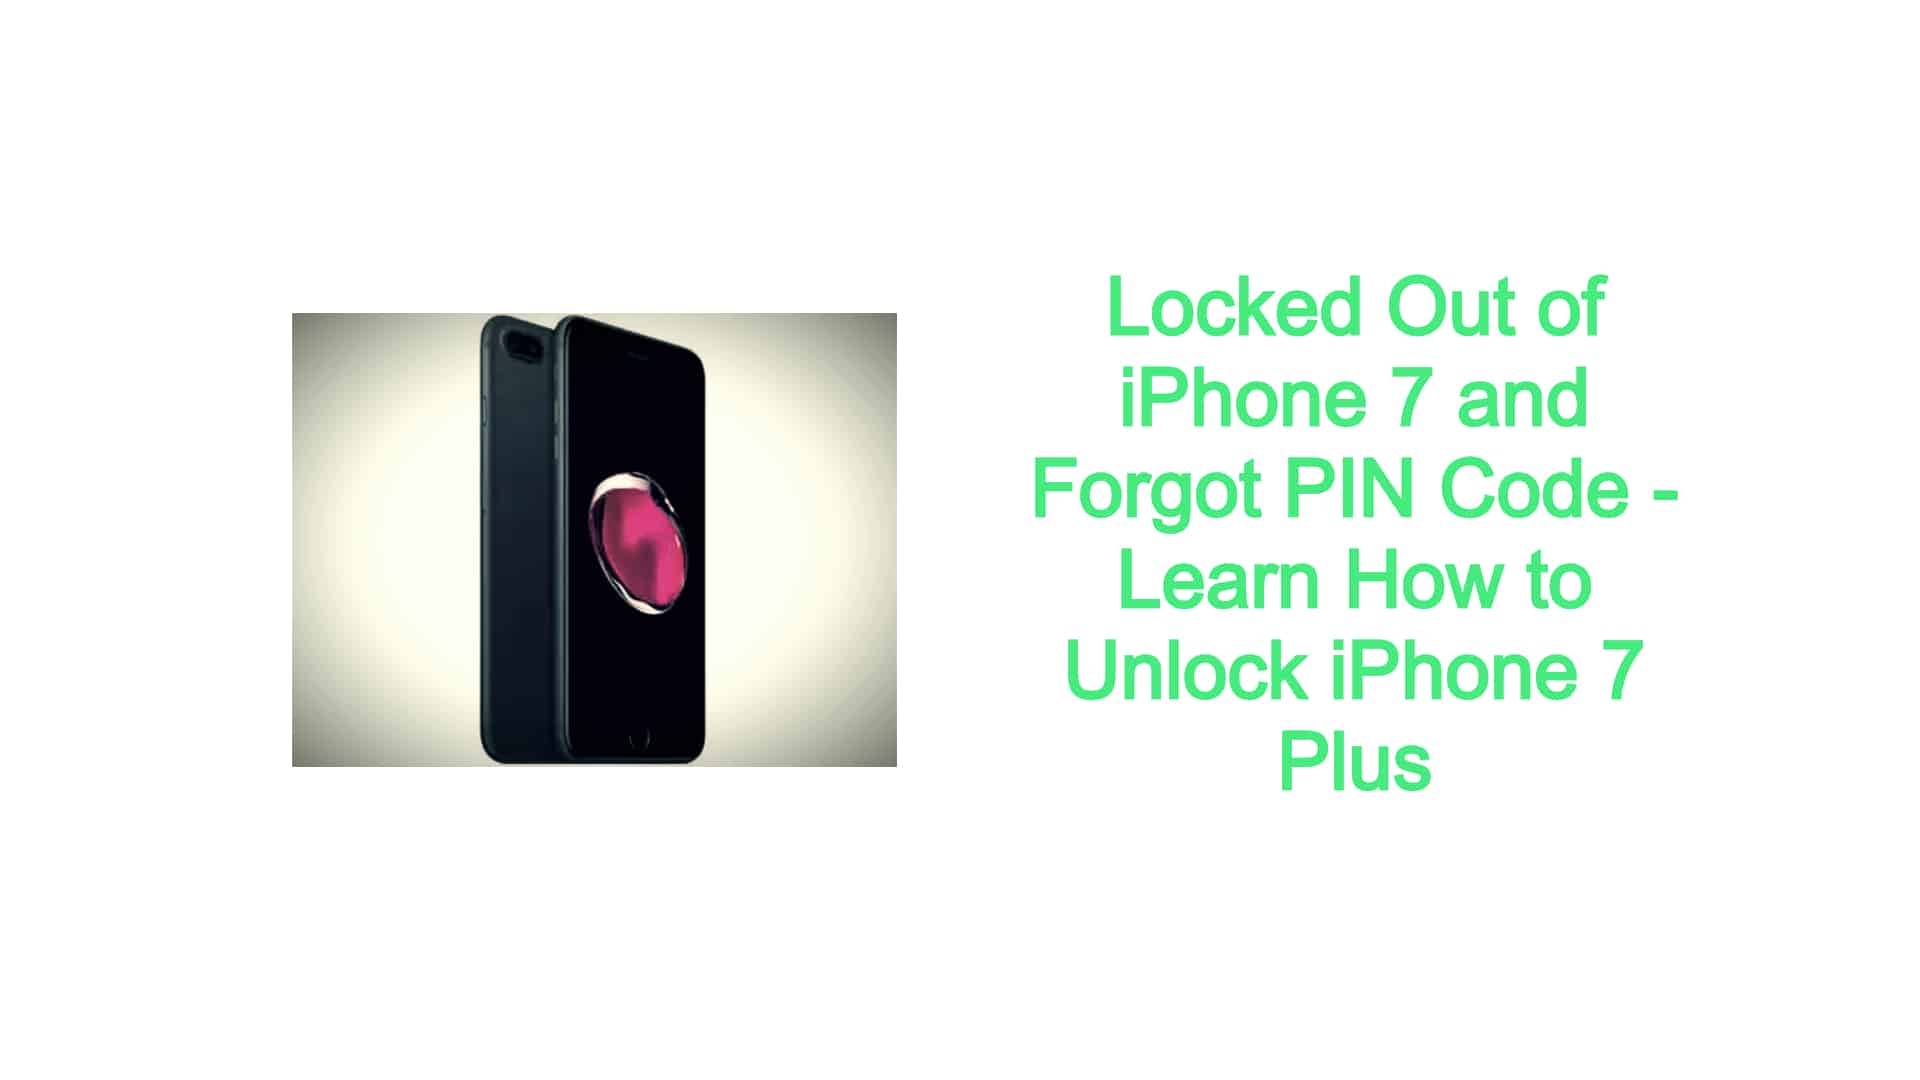 Locked Out of iPhone 7 and PIN Code Learn How to